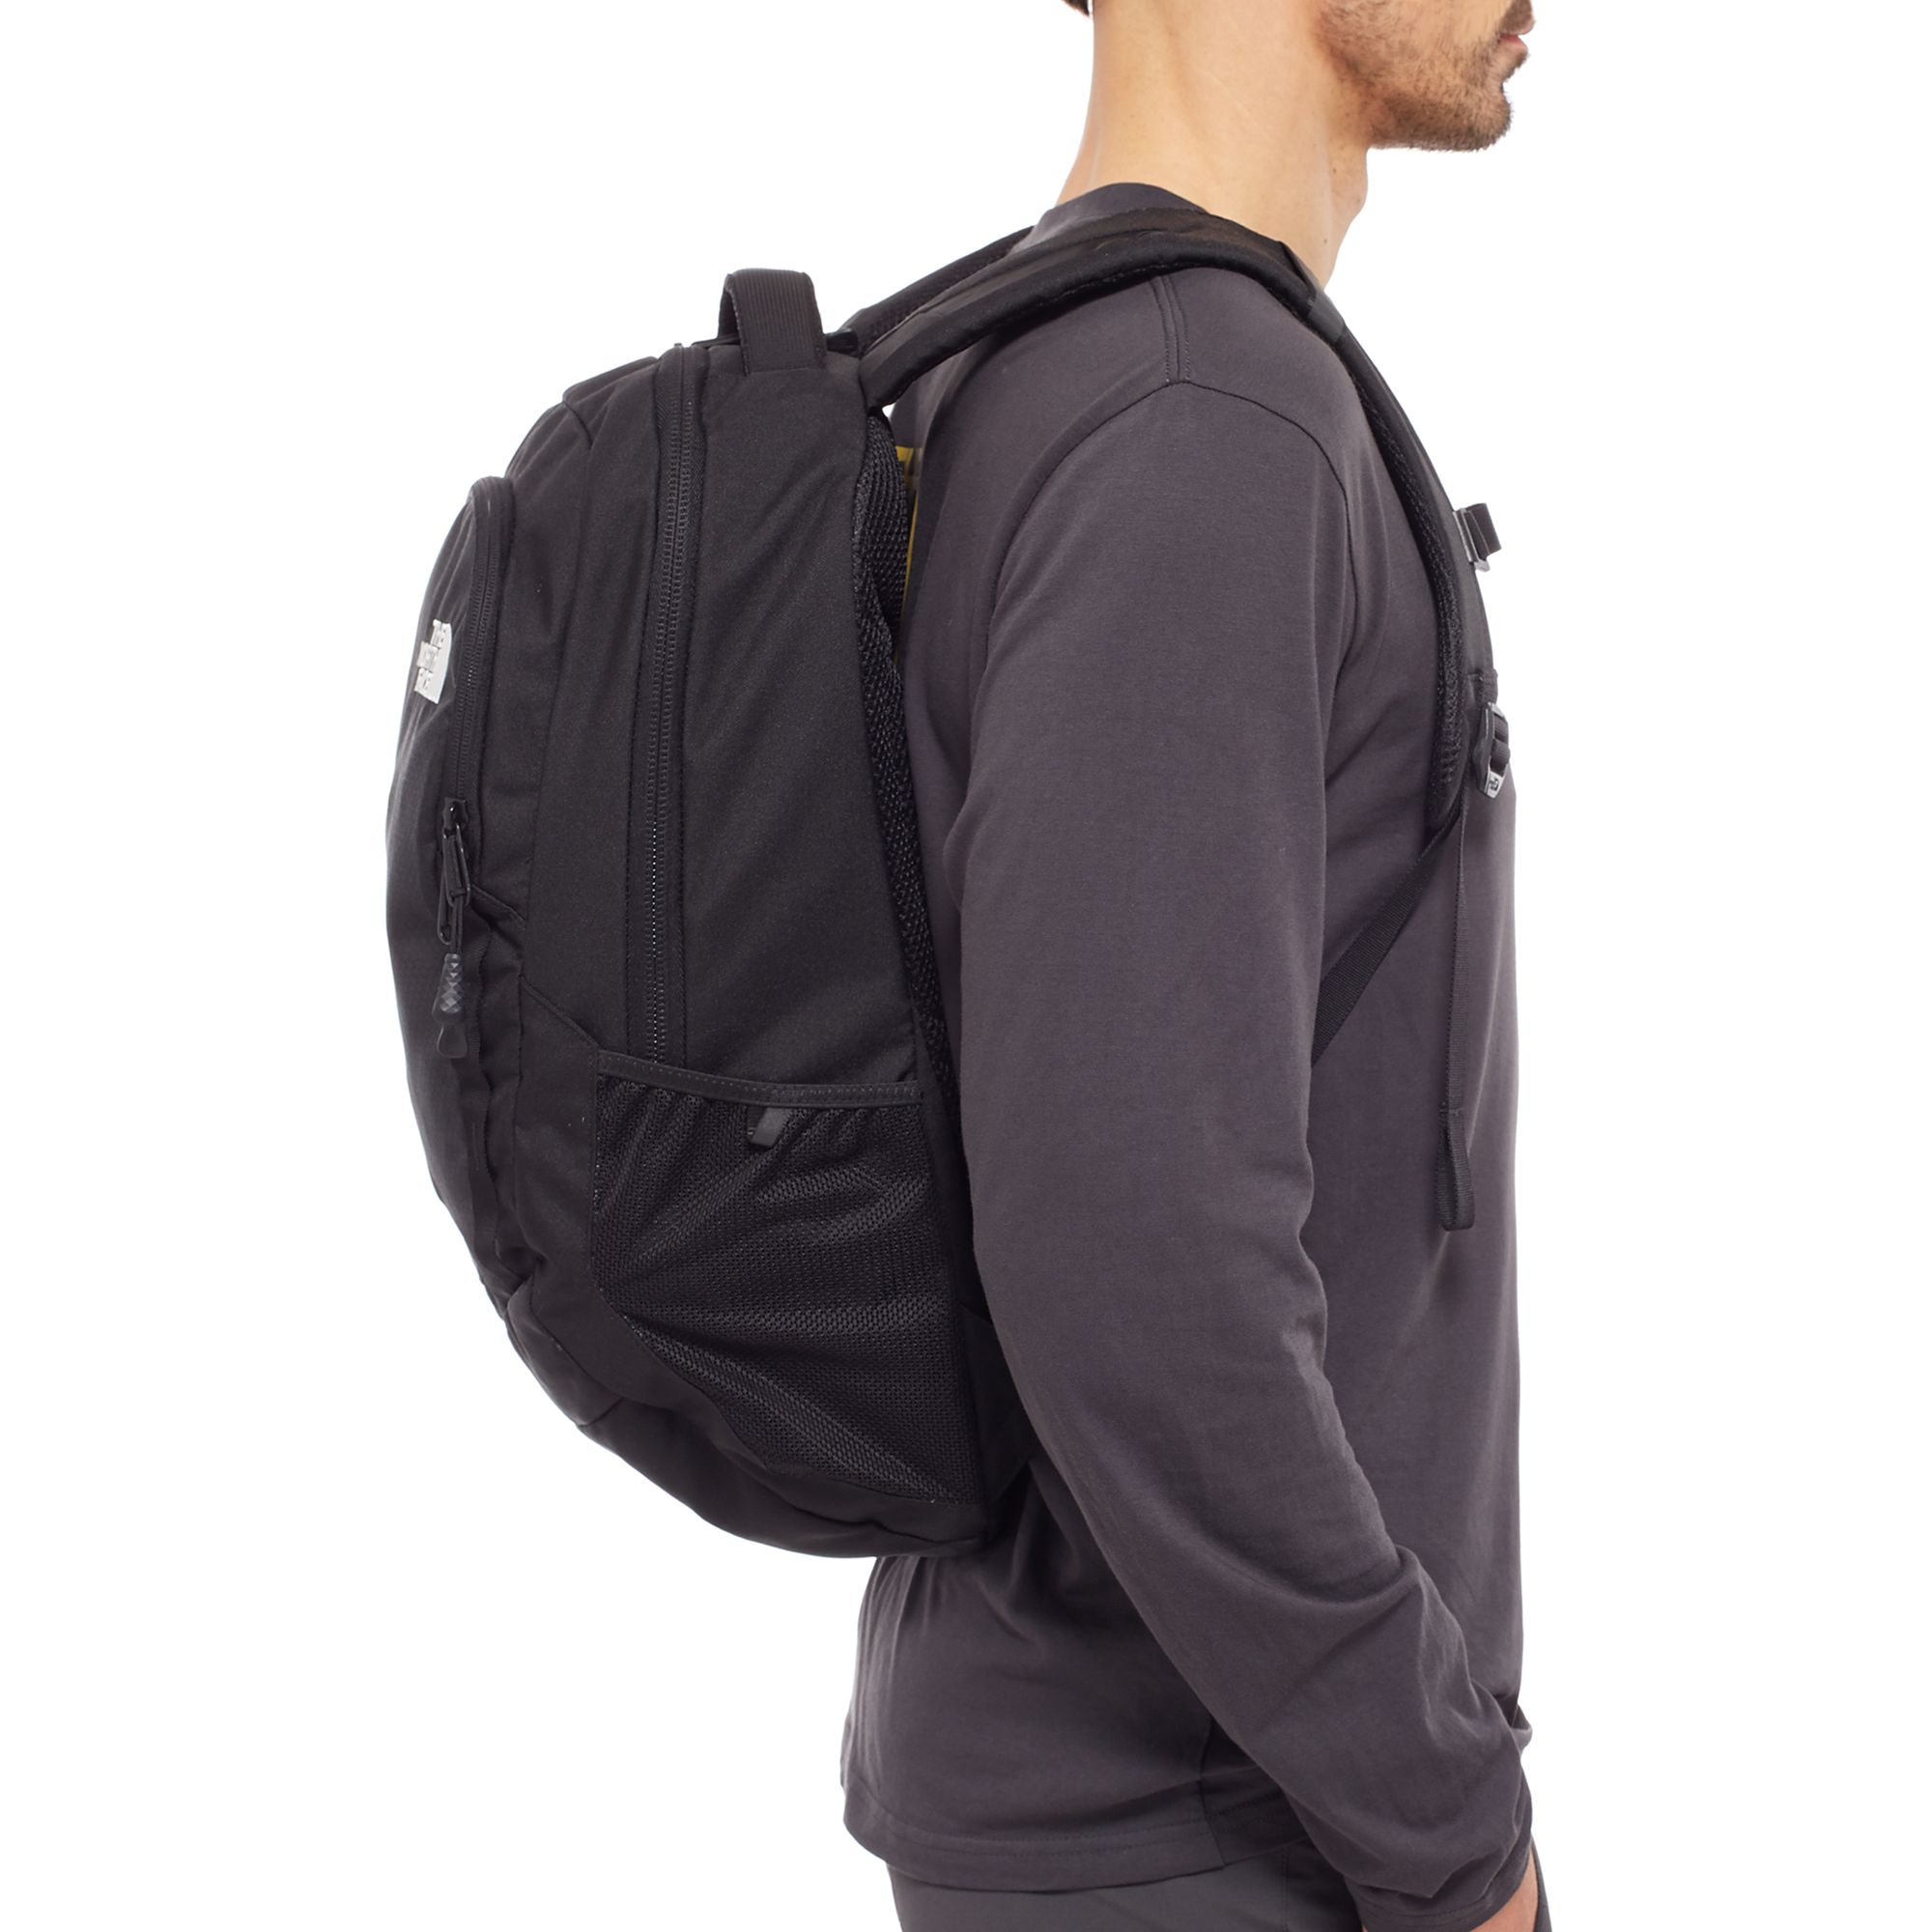 the north face vault bag